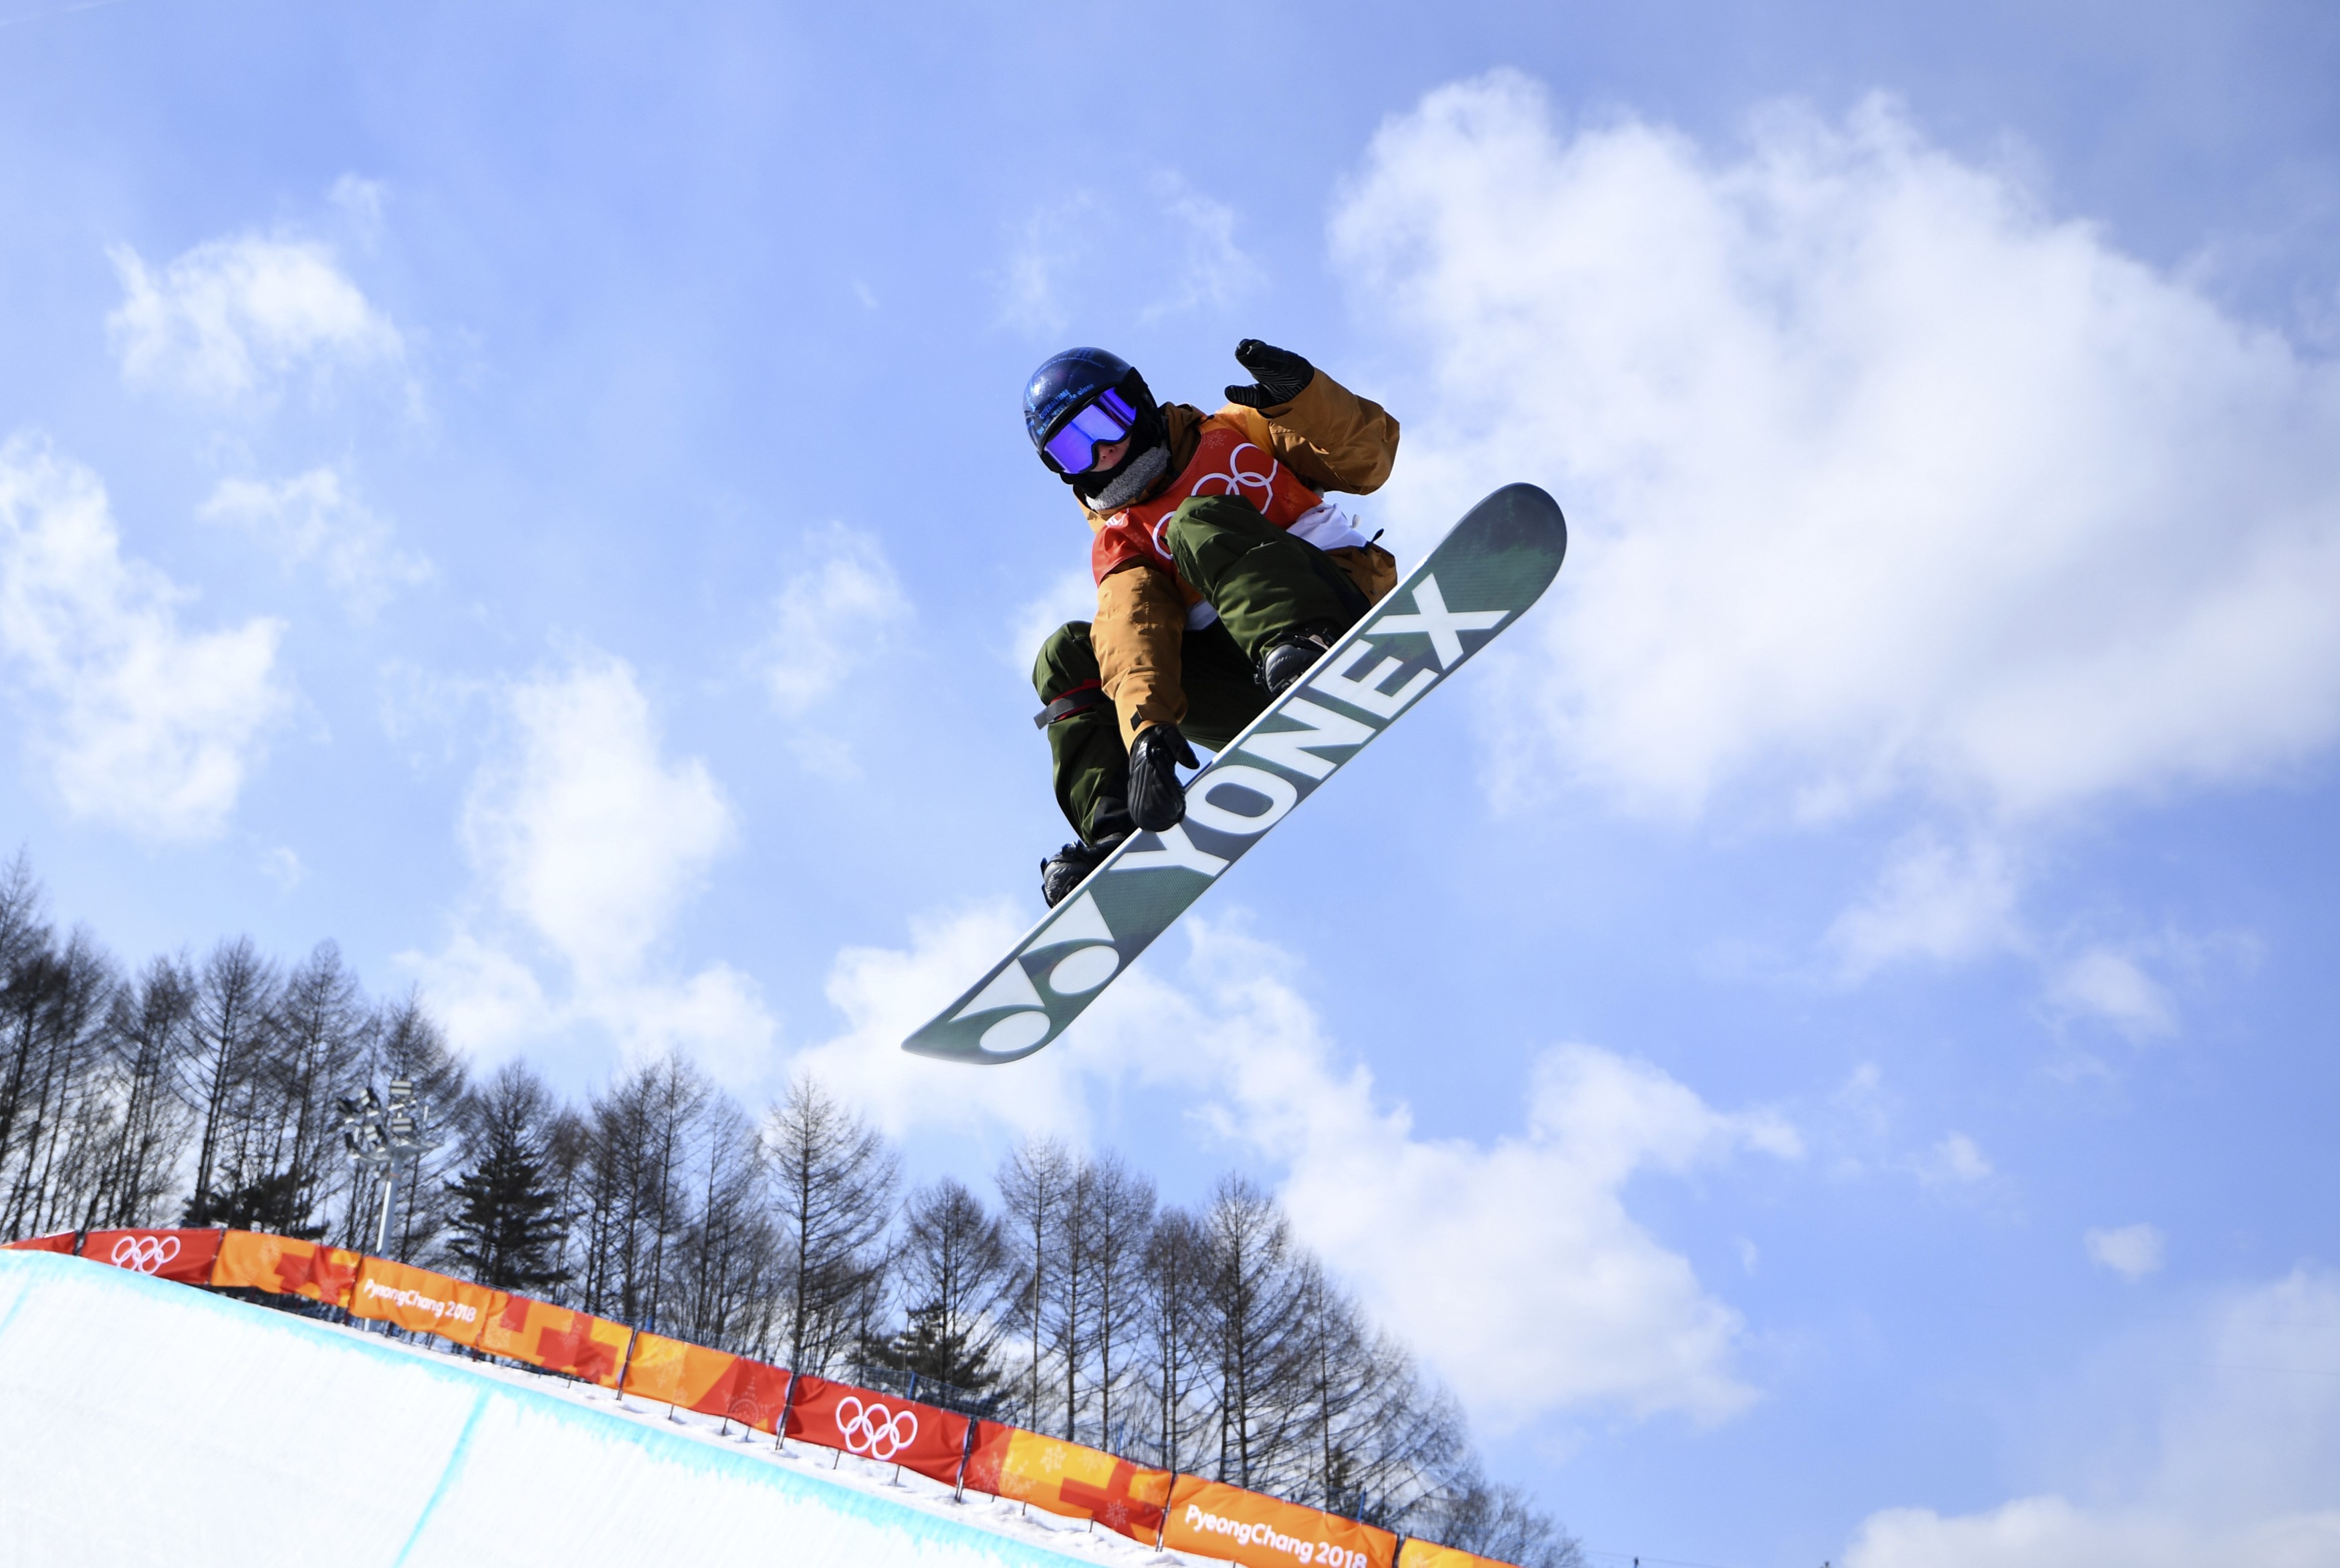 Snowboarder Queralt Castellet training in South Korea (by Mike Blake/Reuters)